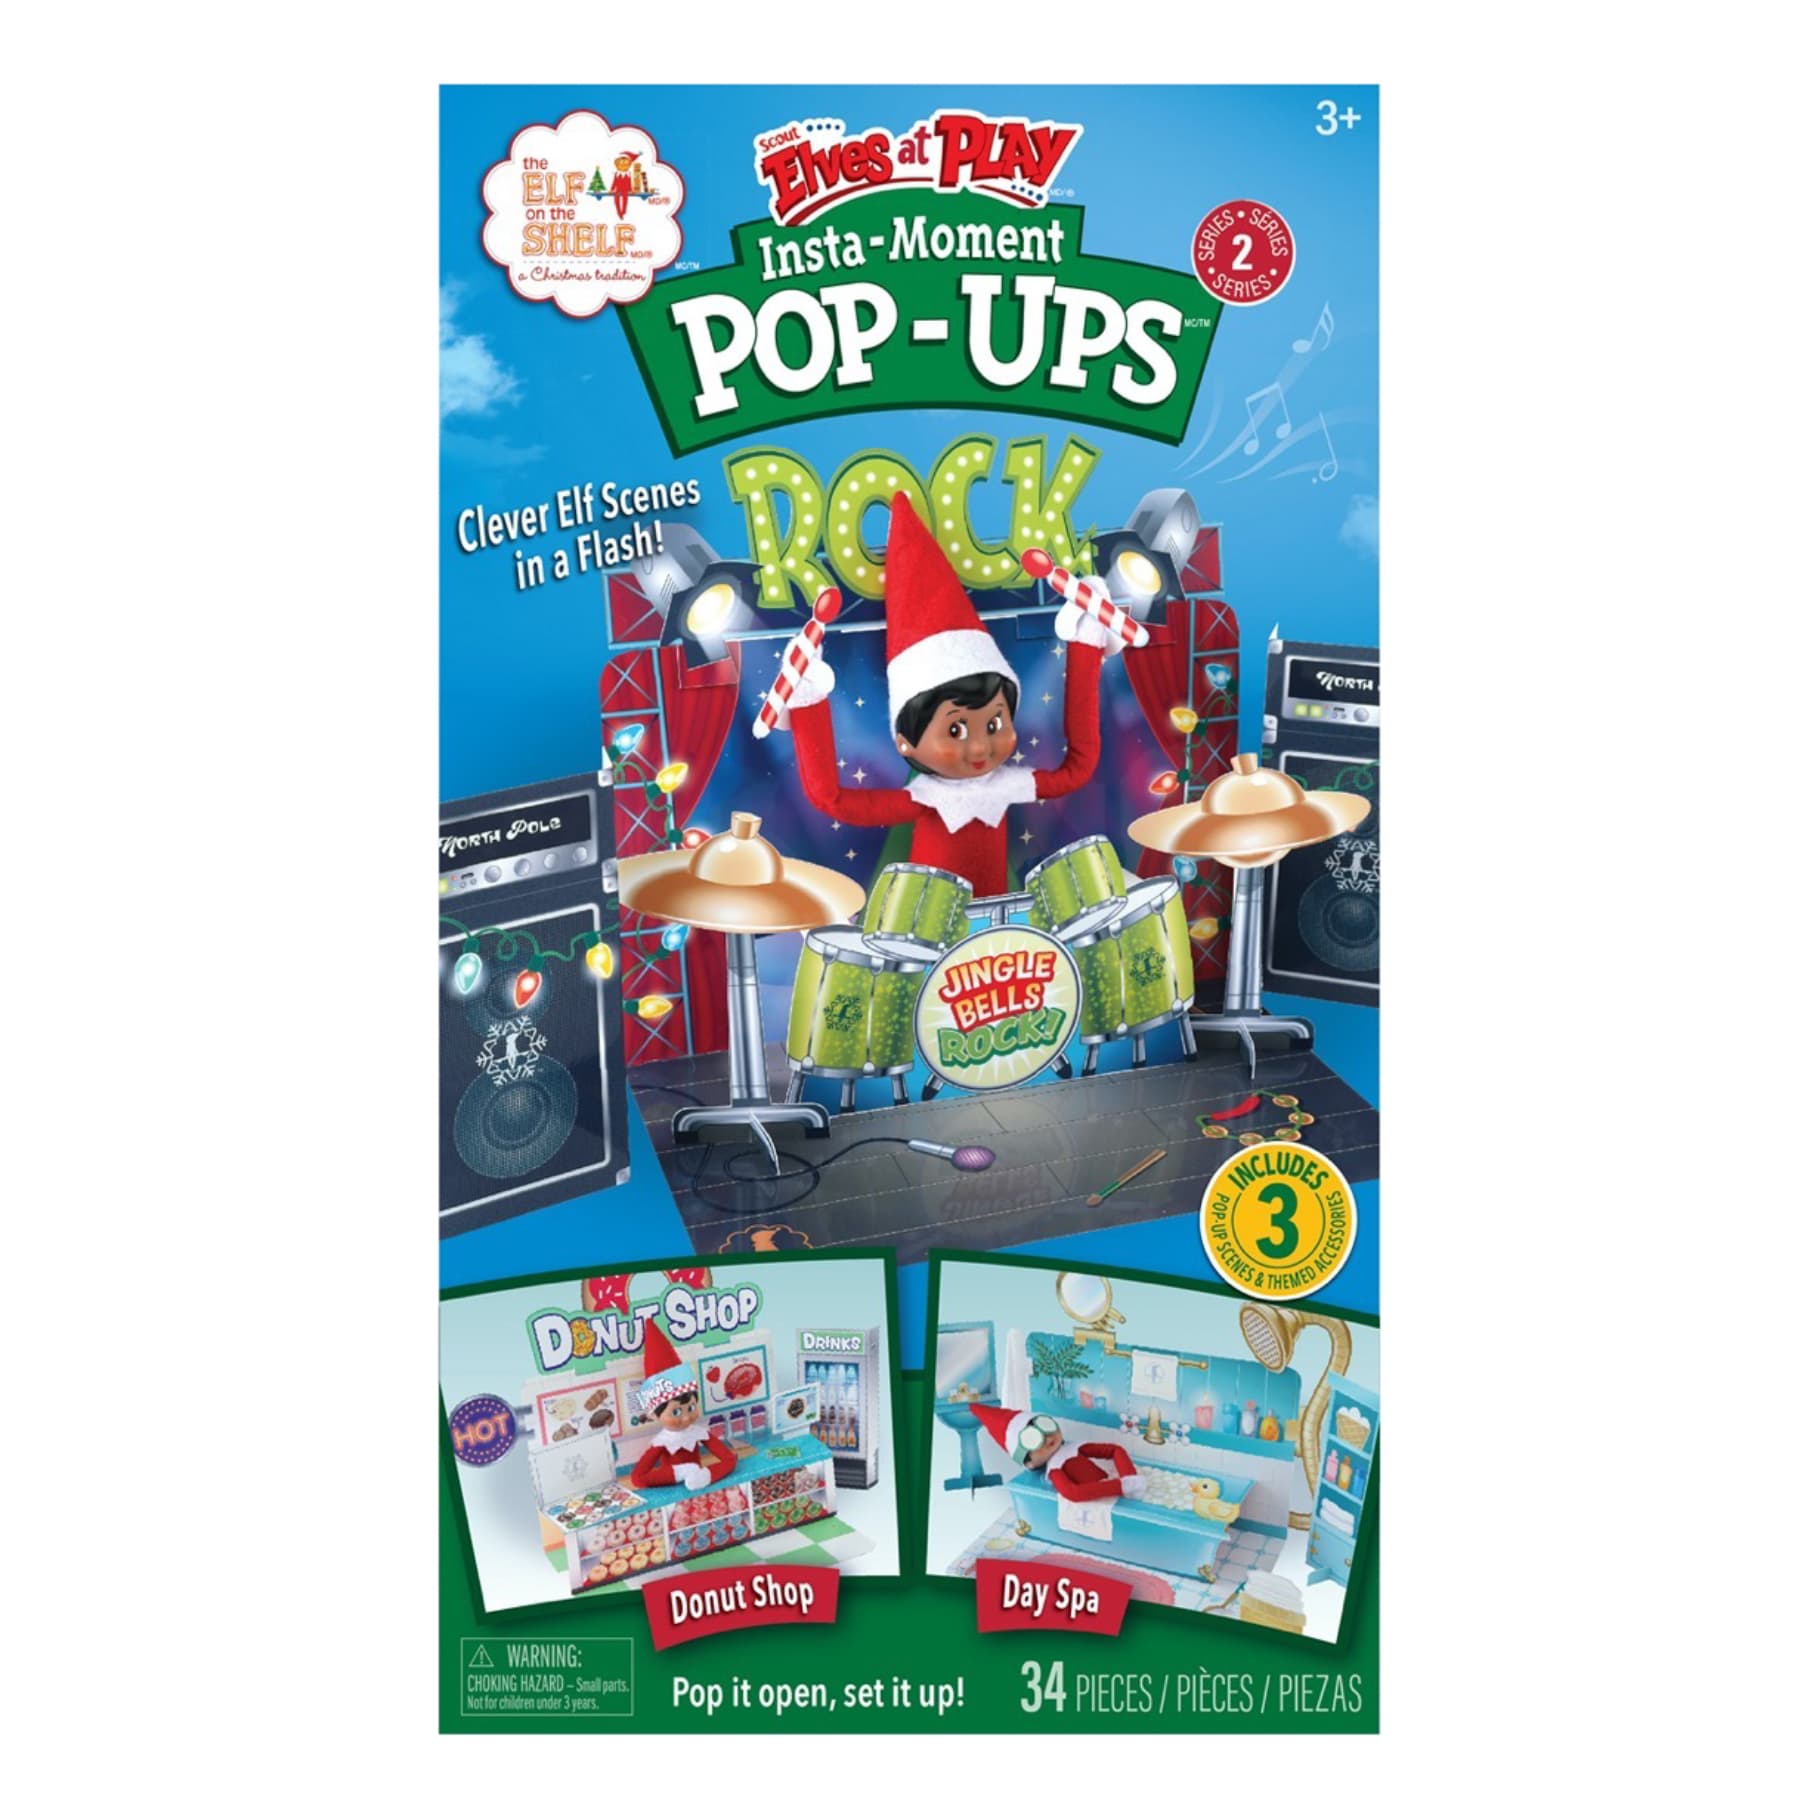 Elf on the Shelf Scout Elves at Play® Insta-Moment Pop-Ups - Series 2